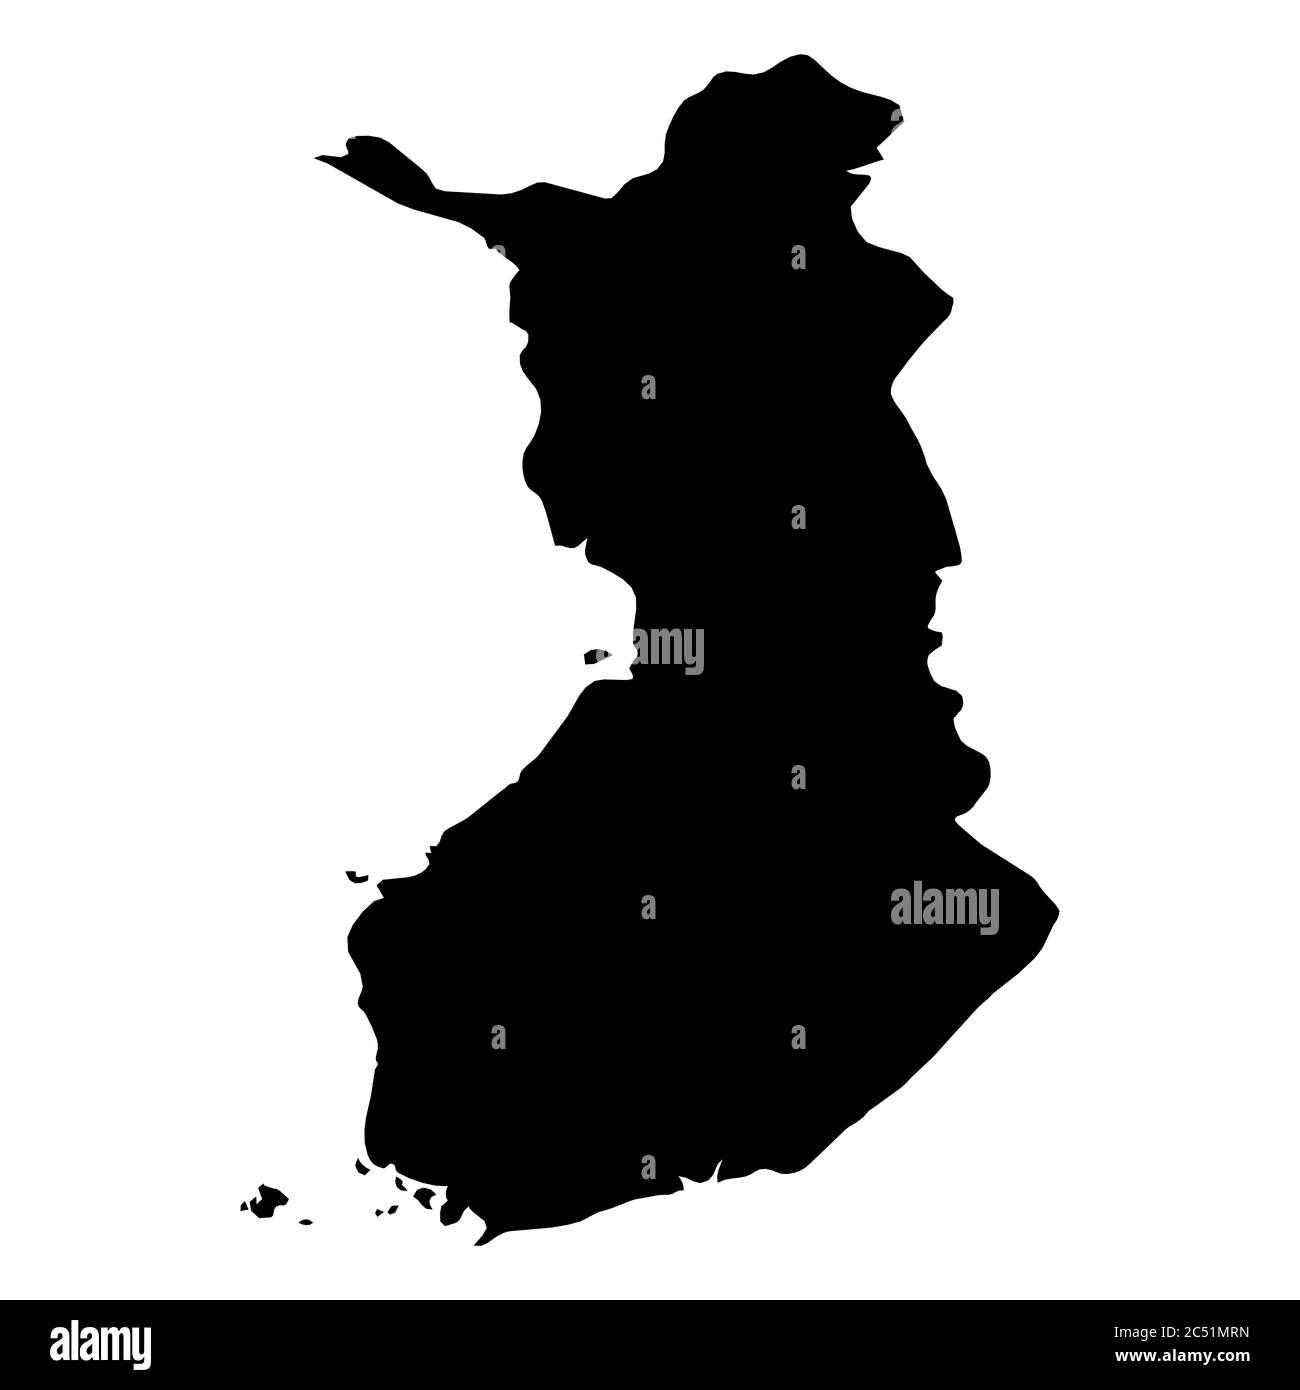 Finland - solid black silhouette map of country area. Simple flat vector illustration. Stock Vector